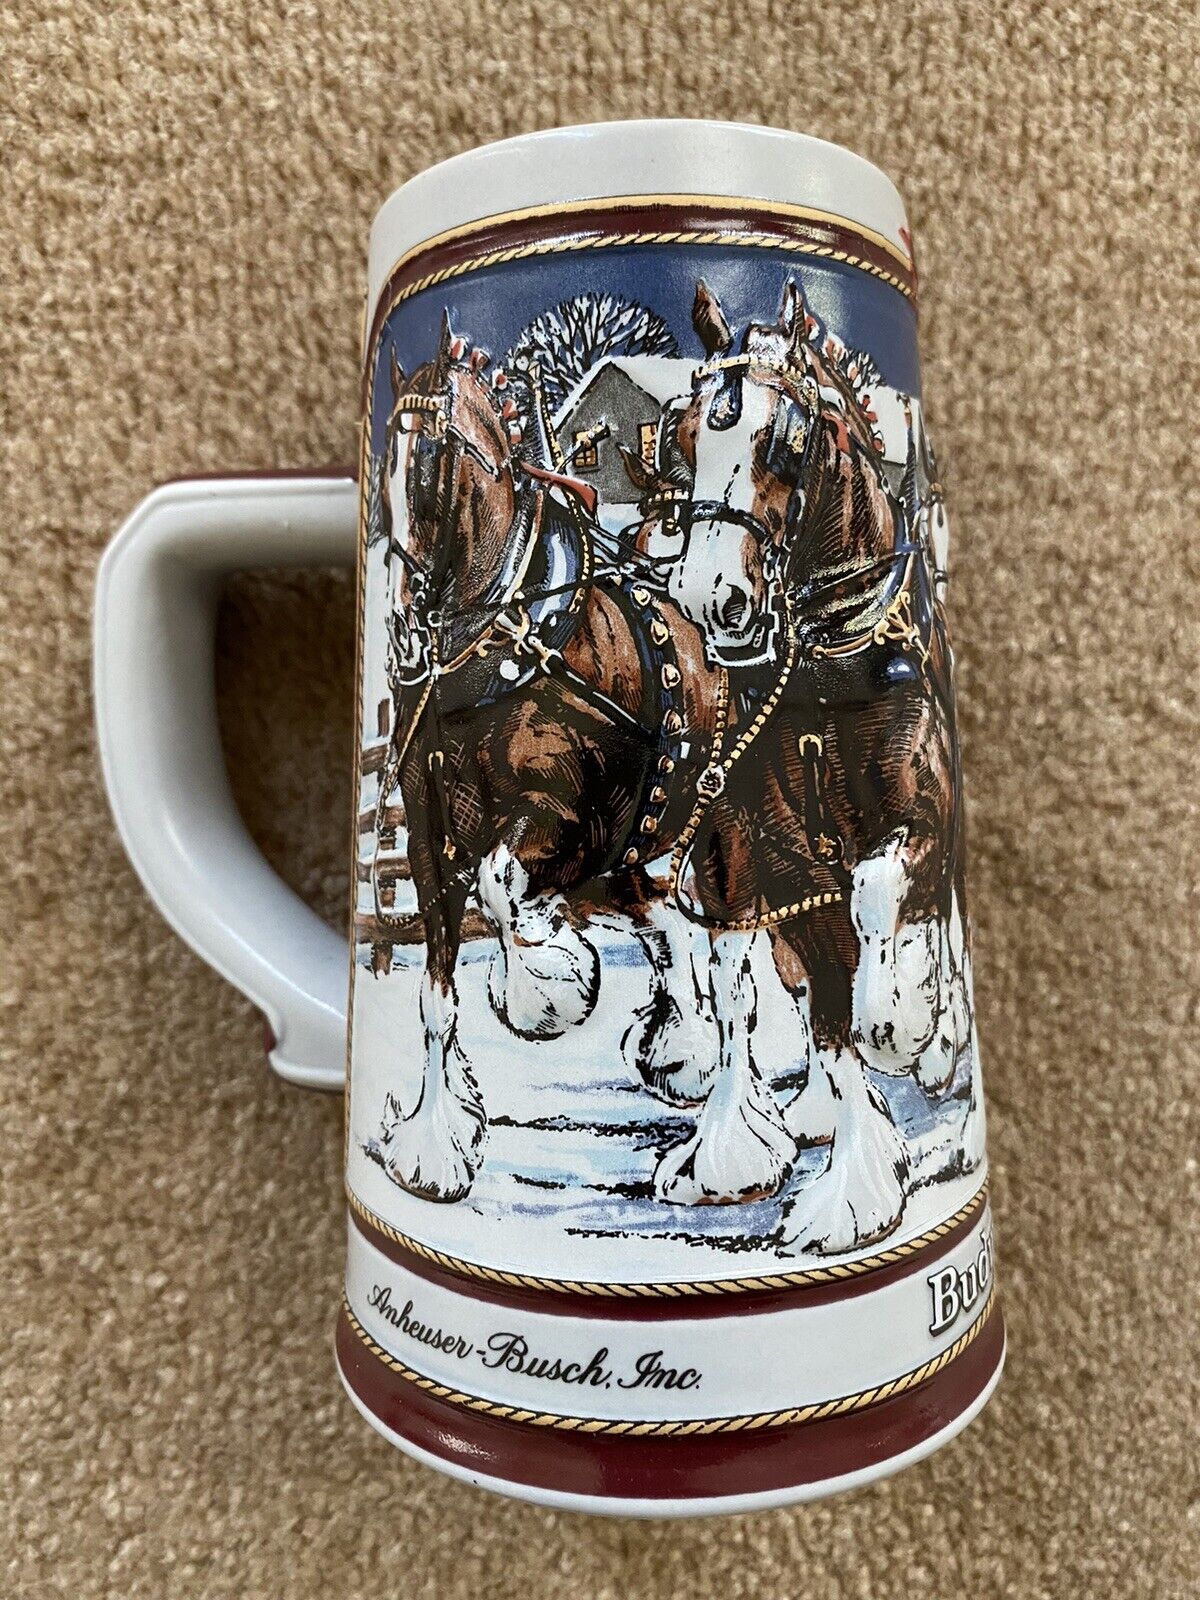 Budweiser 1989 Holiday Beer Stein Clydesdale Collectors Series Anheuser-Busch